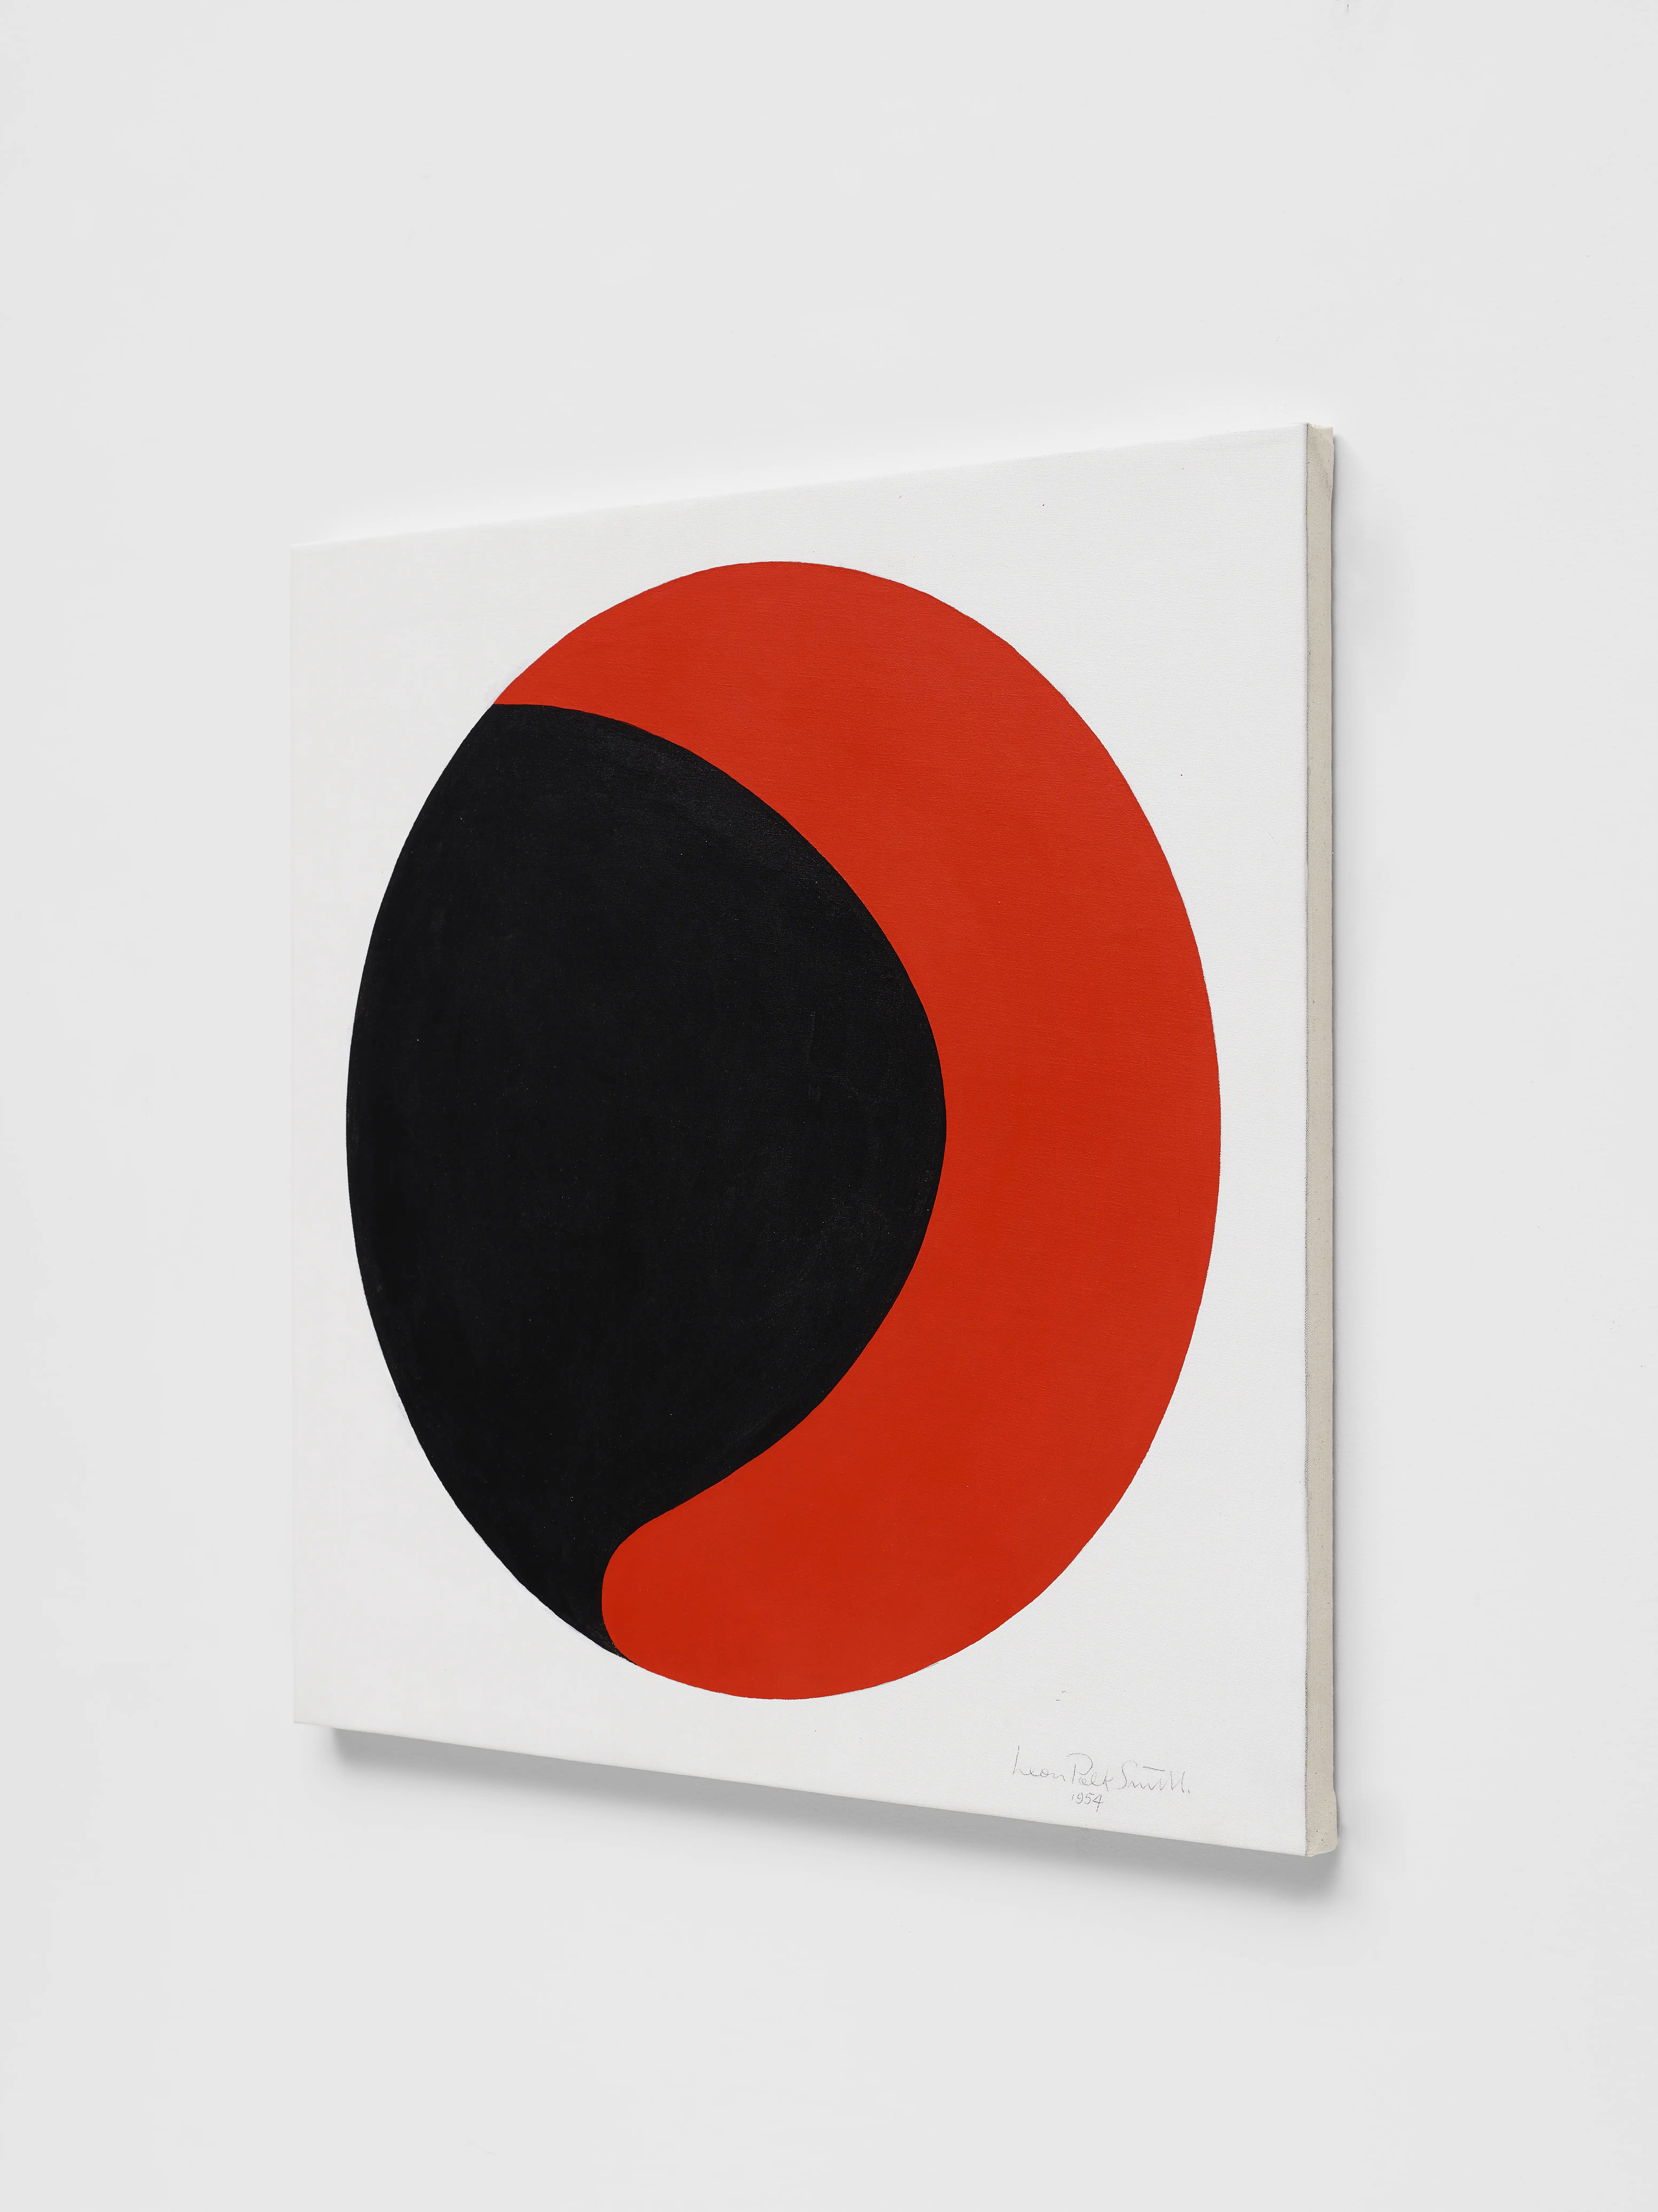 Leon Polk Smith. untitled, 1954. red and black circle.